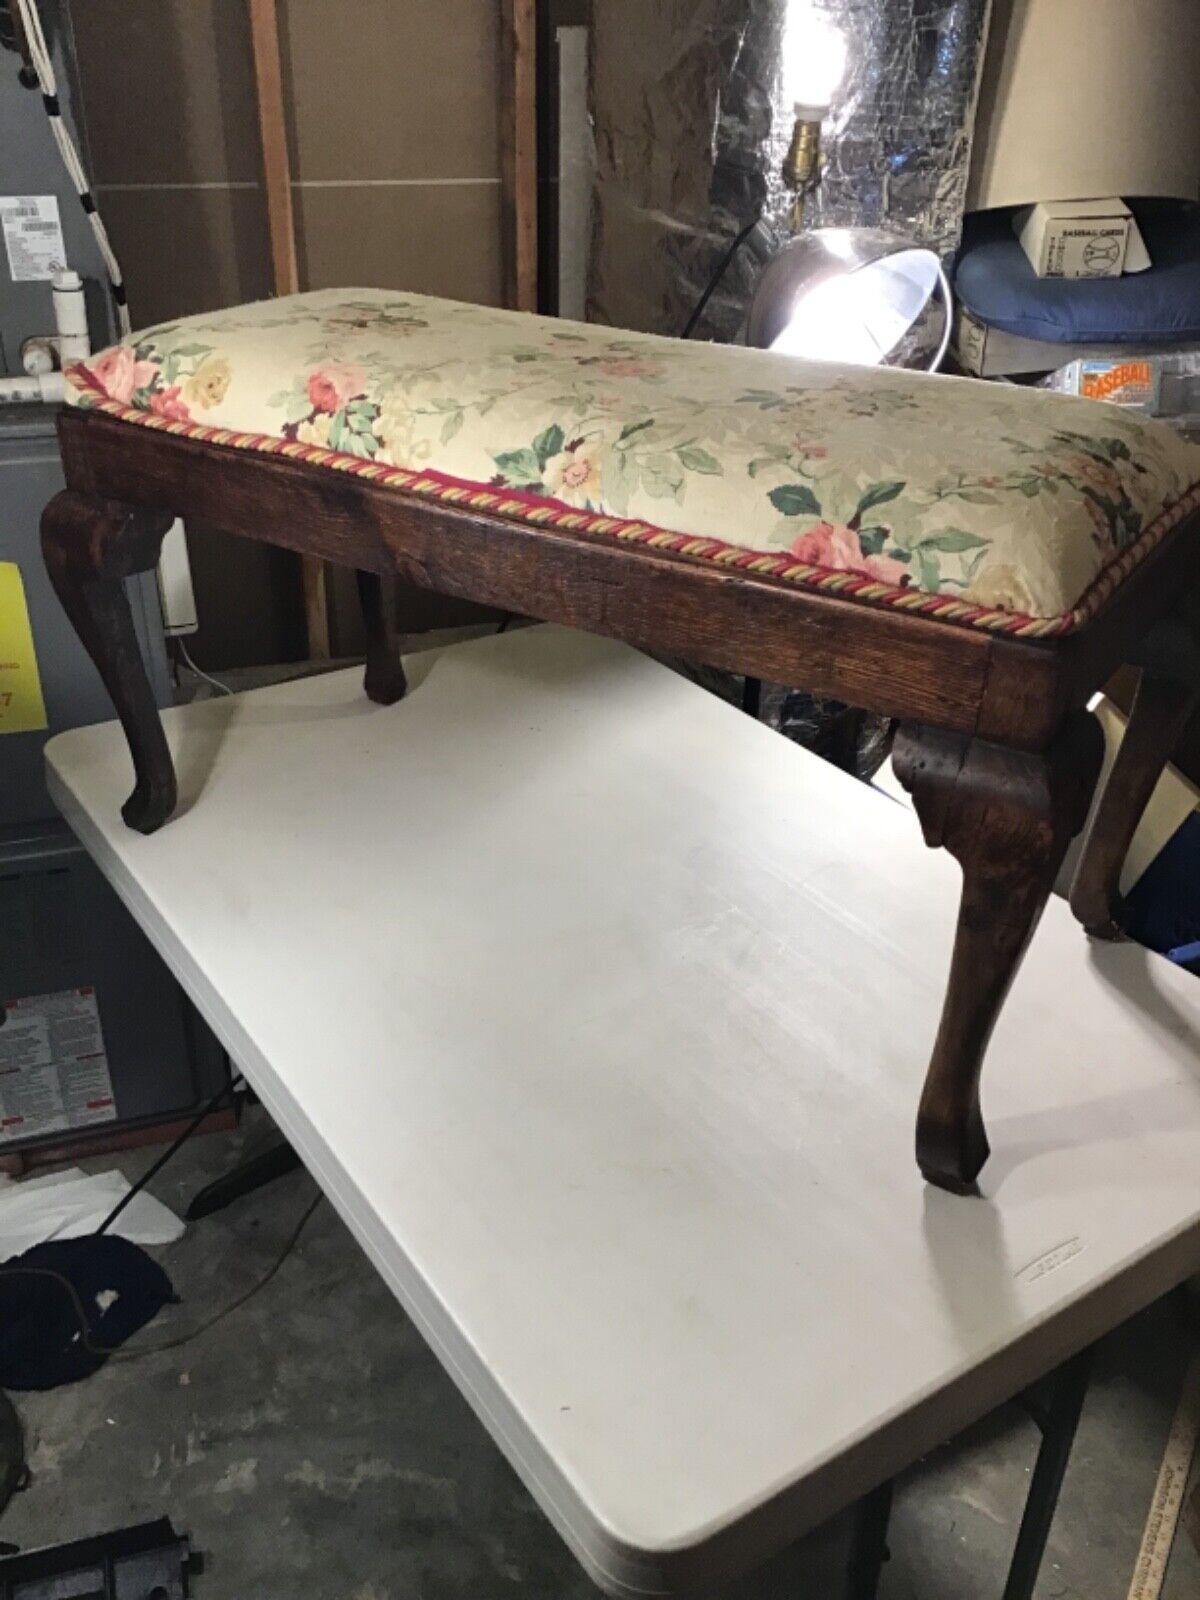 Antique Late 1800’s Bedside Bench With Floral Pillow 38”Lx20”Wx20”H Read Below